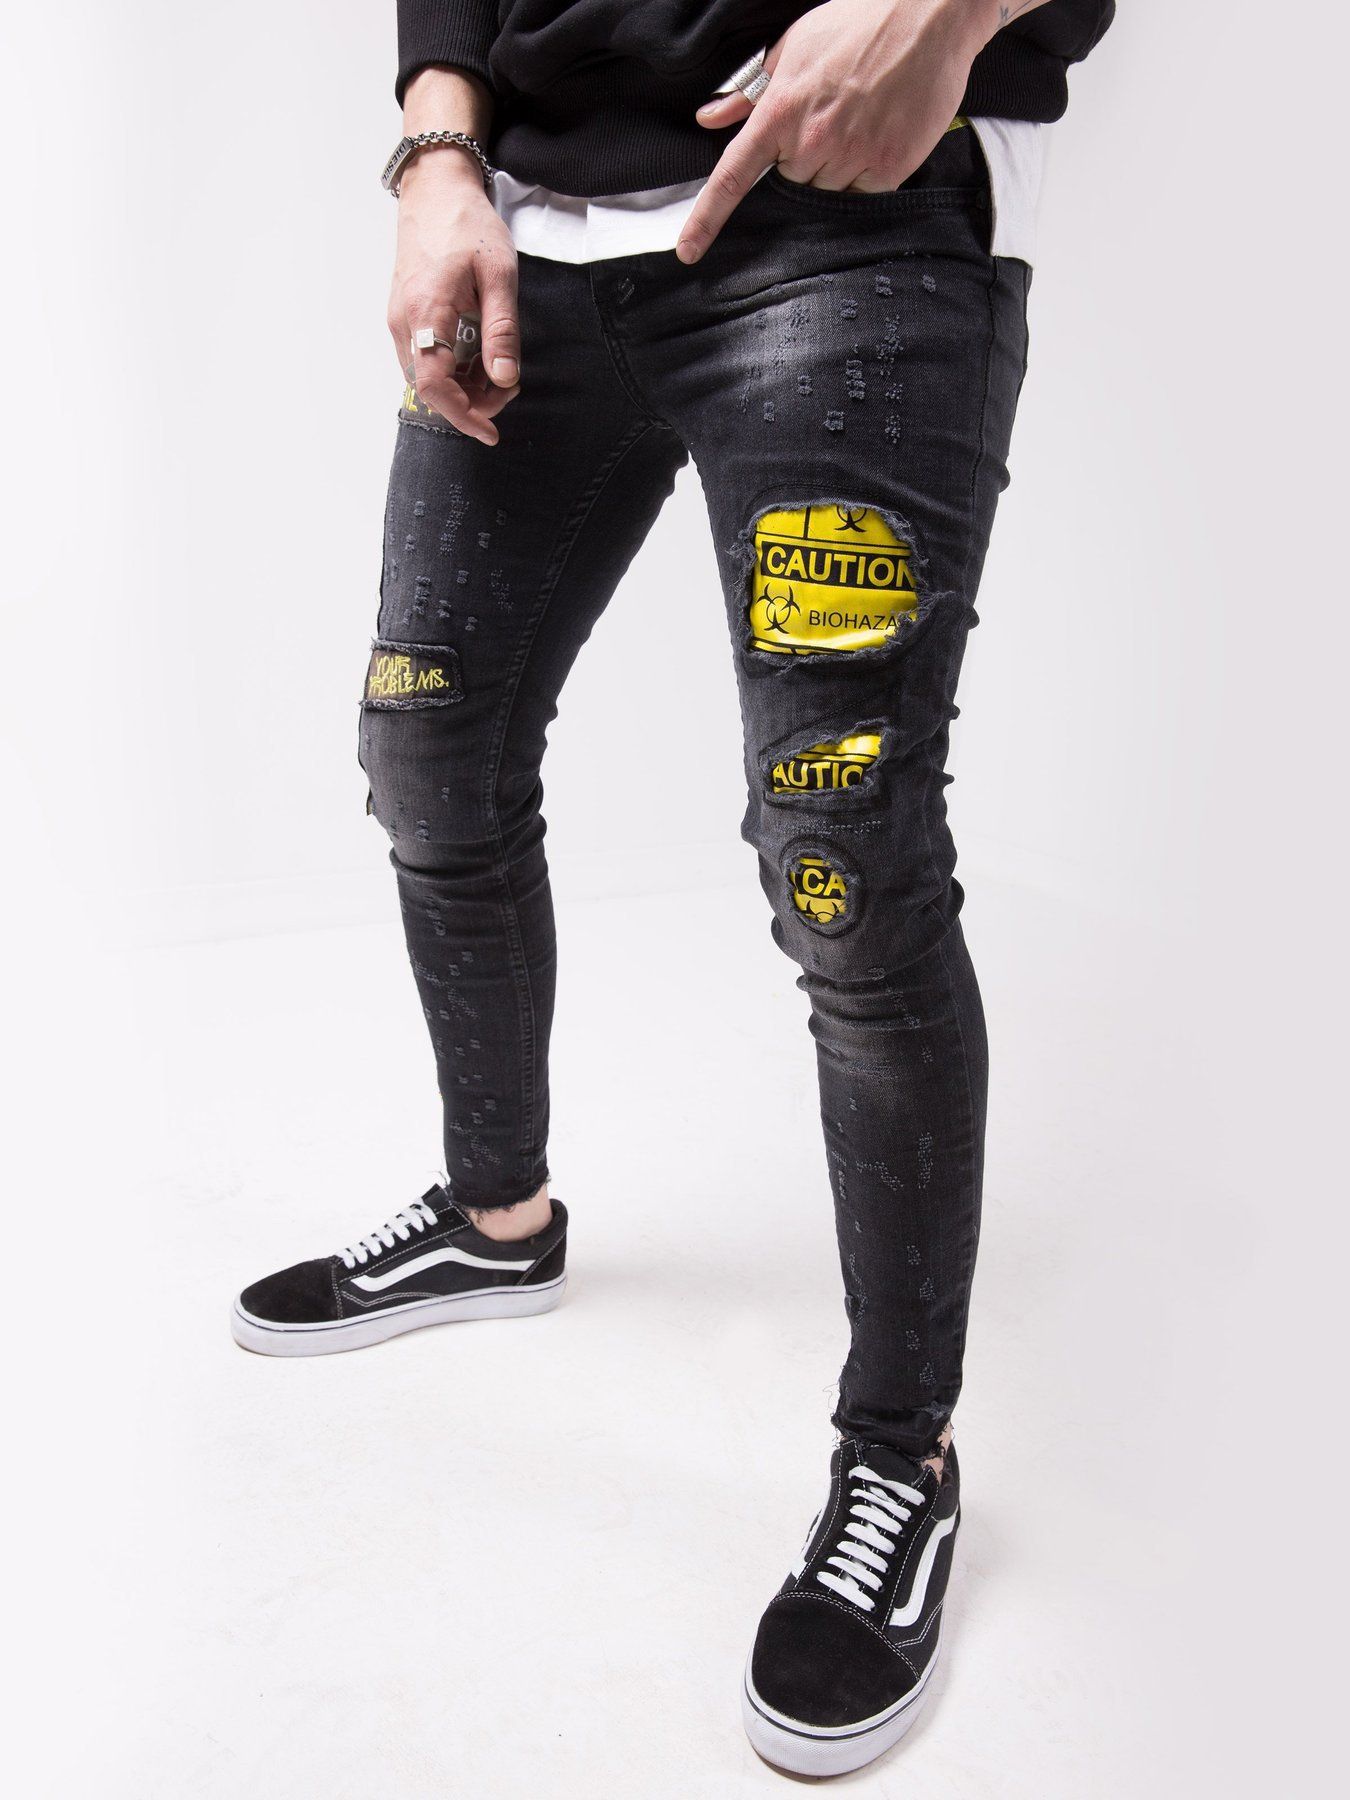 A man wearing BLACK FALCON jeans with yellow patches.